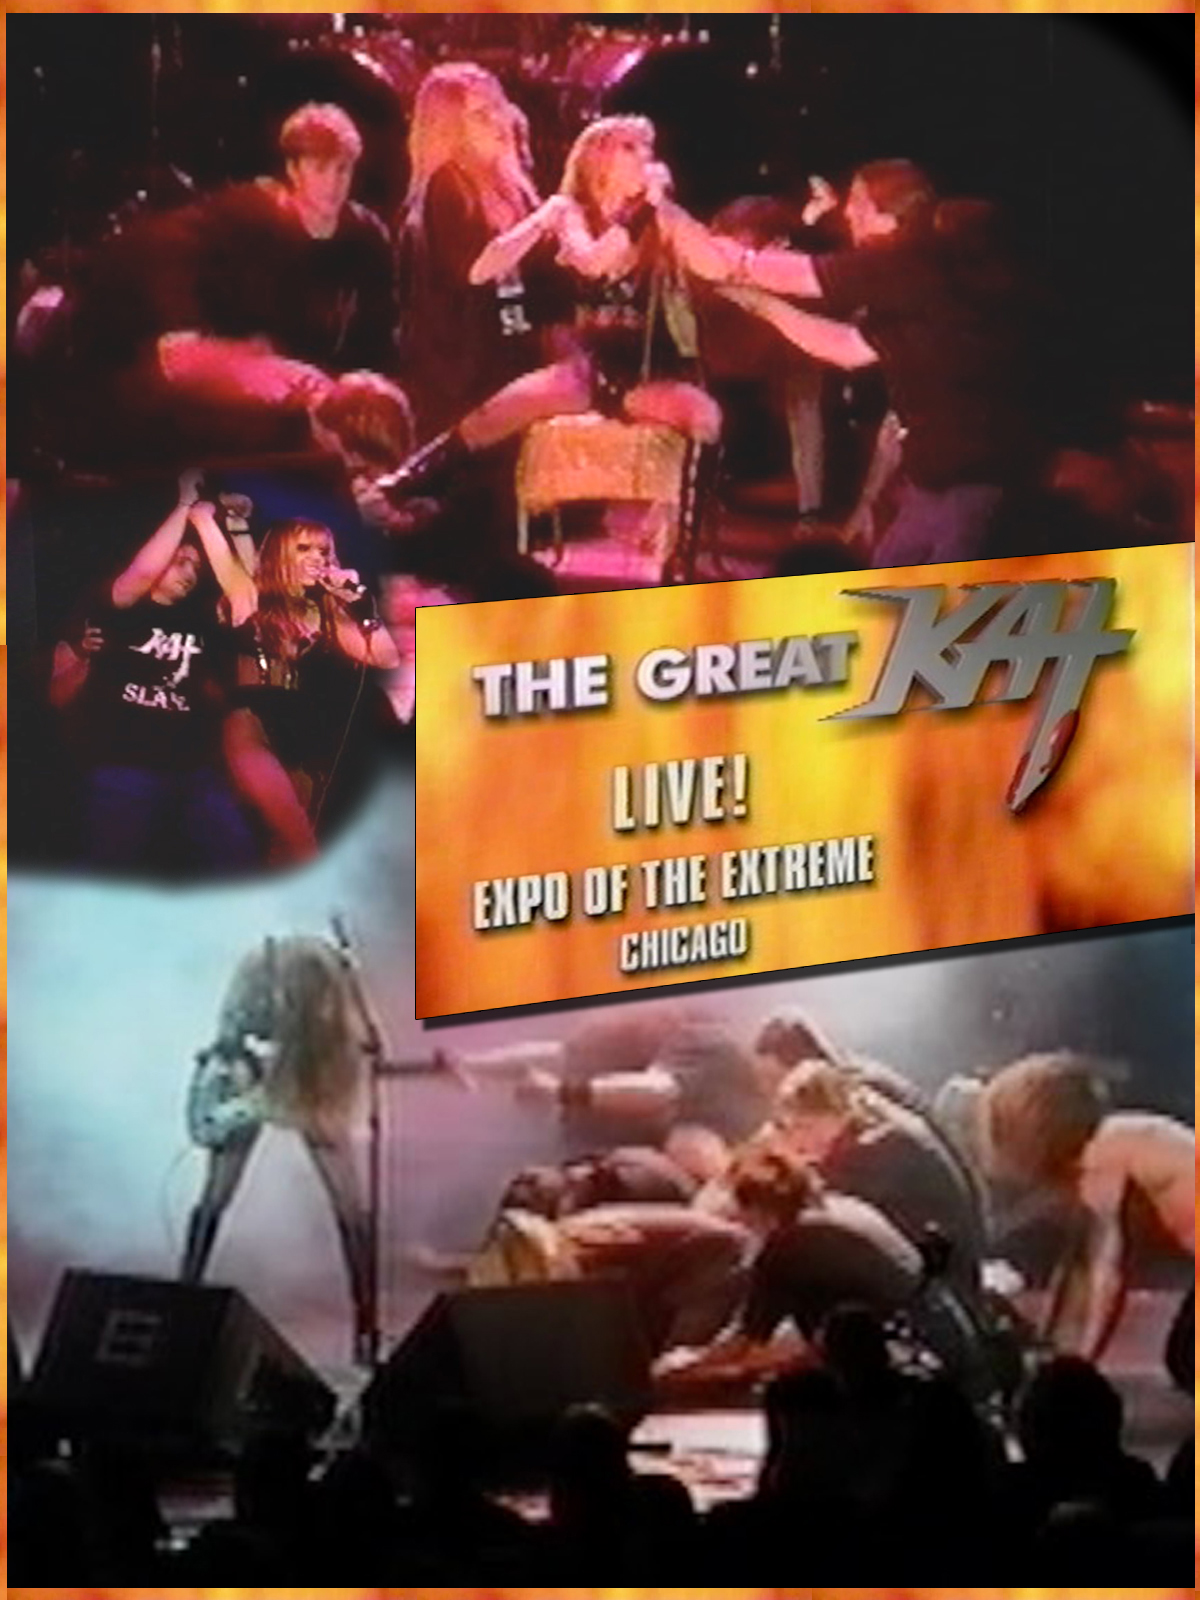 AMAZON PRIME PREMIERES the FAMOUS LIVE AT THE EXPO OF THE EXTREME! VIDEO by THE GREAT KAT GUITAR SHREDDER! Watch the insanity: https://www.amazon.com/dp/B07CMC72NL Bow to your Goddess. The Great Kat Guitar Goddess and her crazed Kat Slaves take over the Expo of the Extreme in this outrageous live concert with insane worshipping, bowing, shredding, headbanging and metal madness! Watch the high priestess of guitar shred scream at her Kat-possessed fans and demand their loyalty, attention and worship. Obey your goddess and watch. https://www.amazon.com/dp/B07CMC72NL